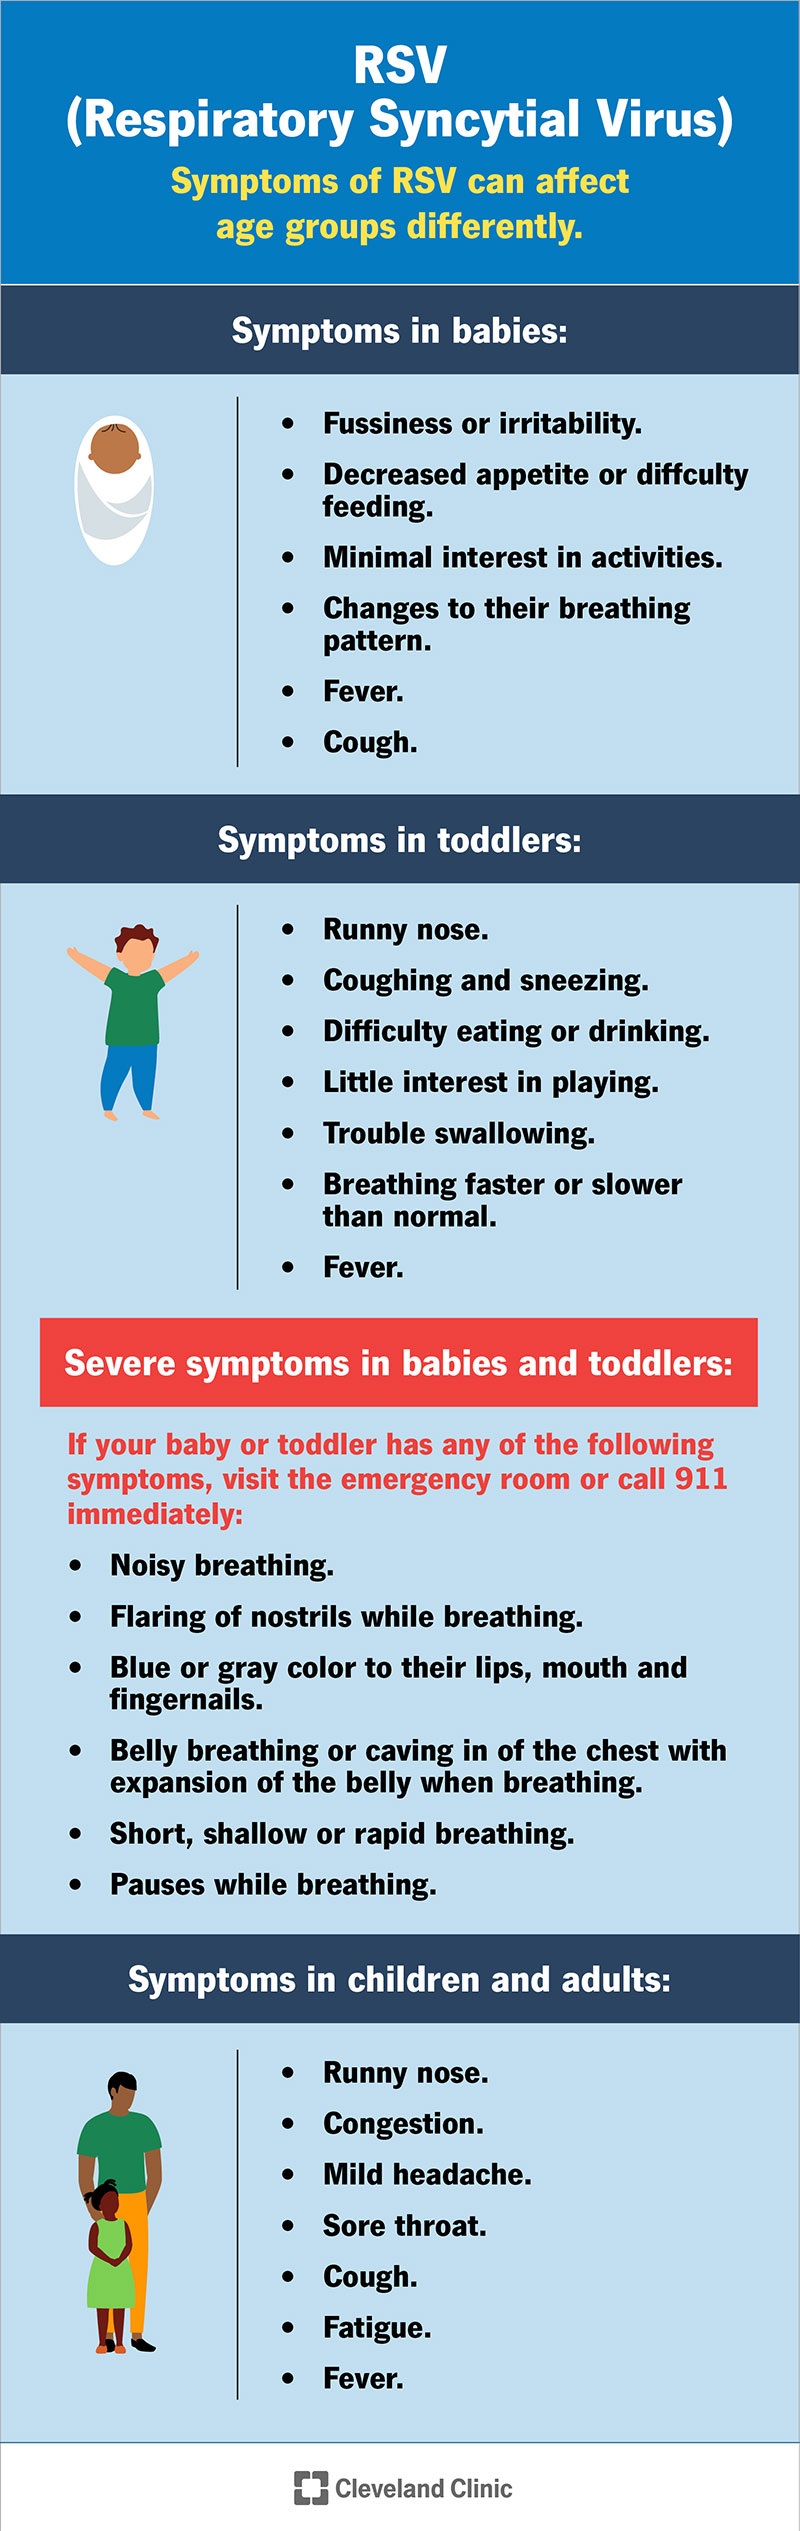 Symptoms of RSV can affect babies, toddlers, children and adults.